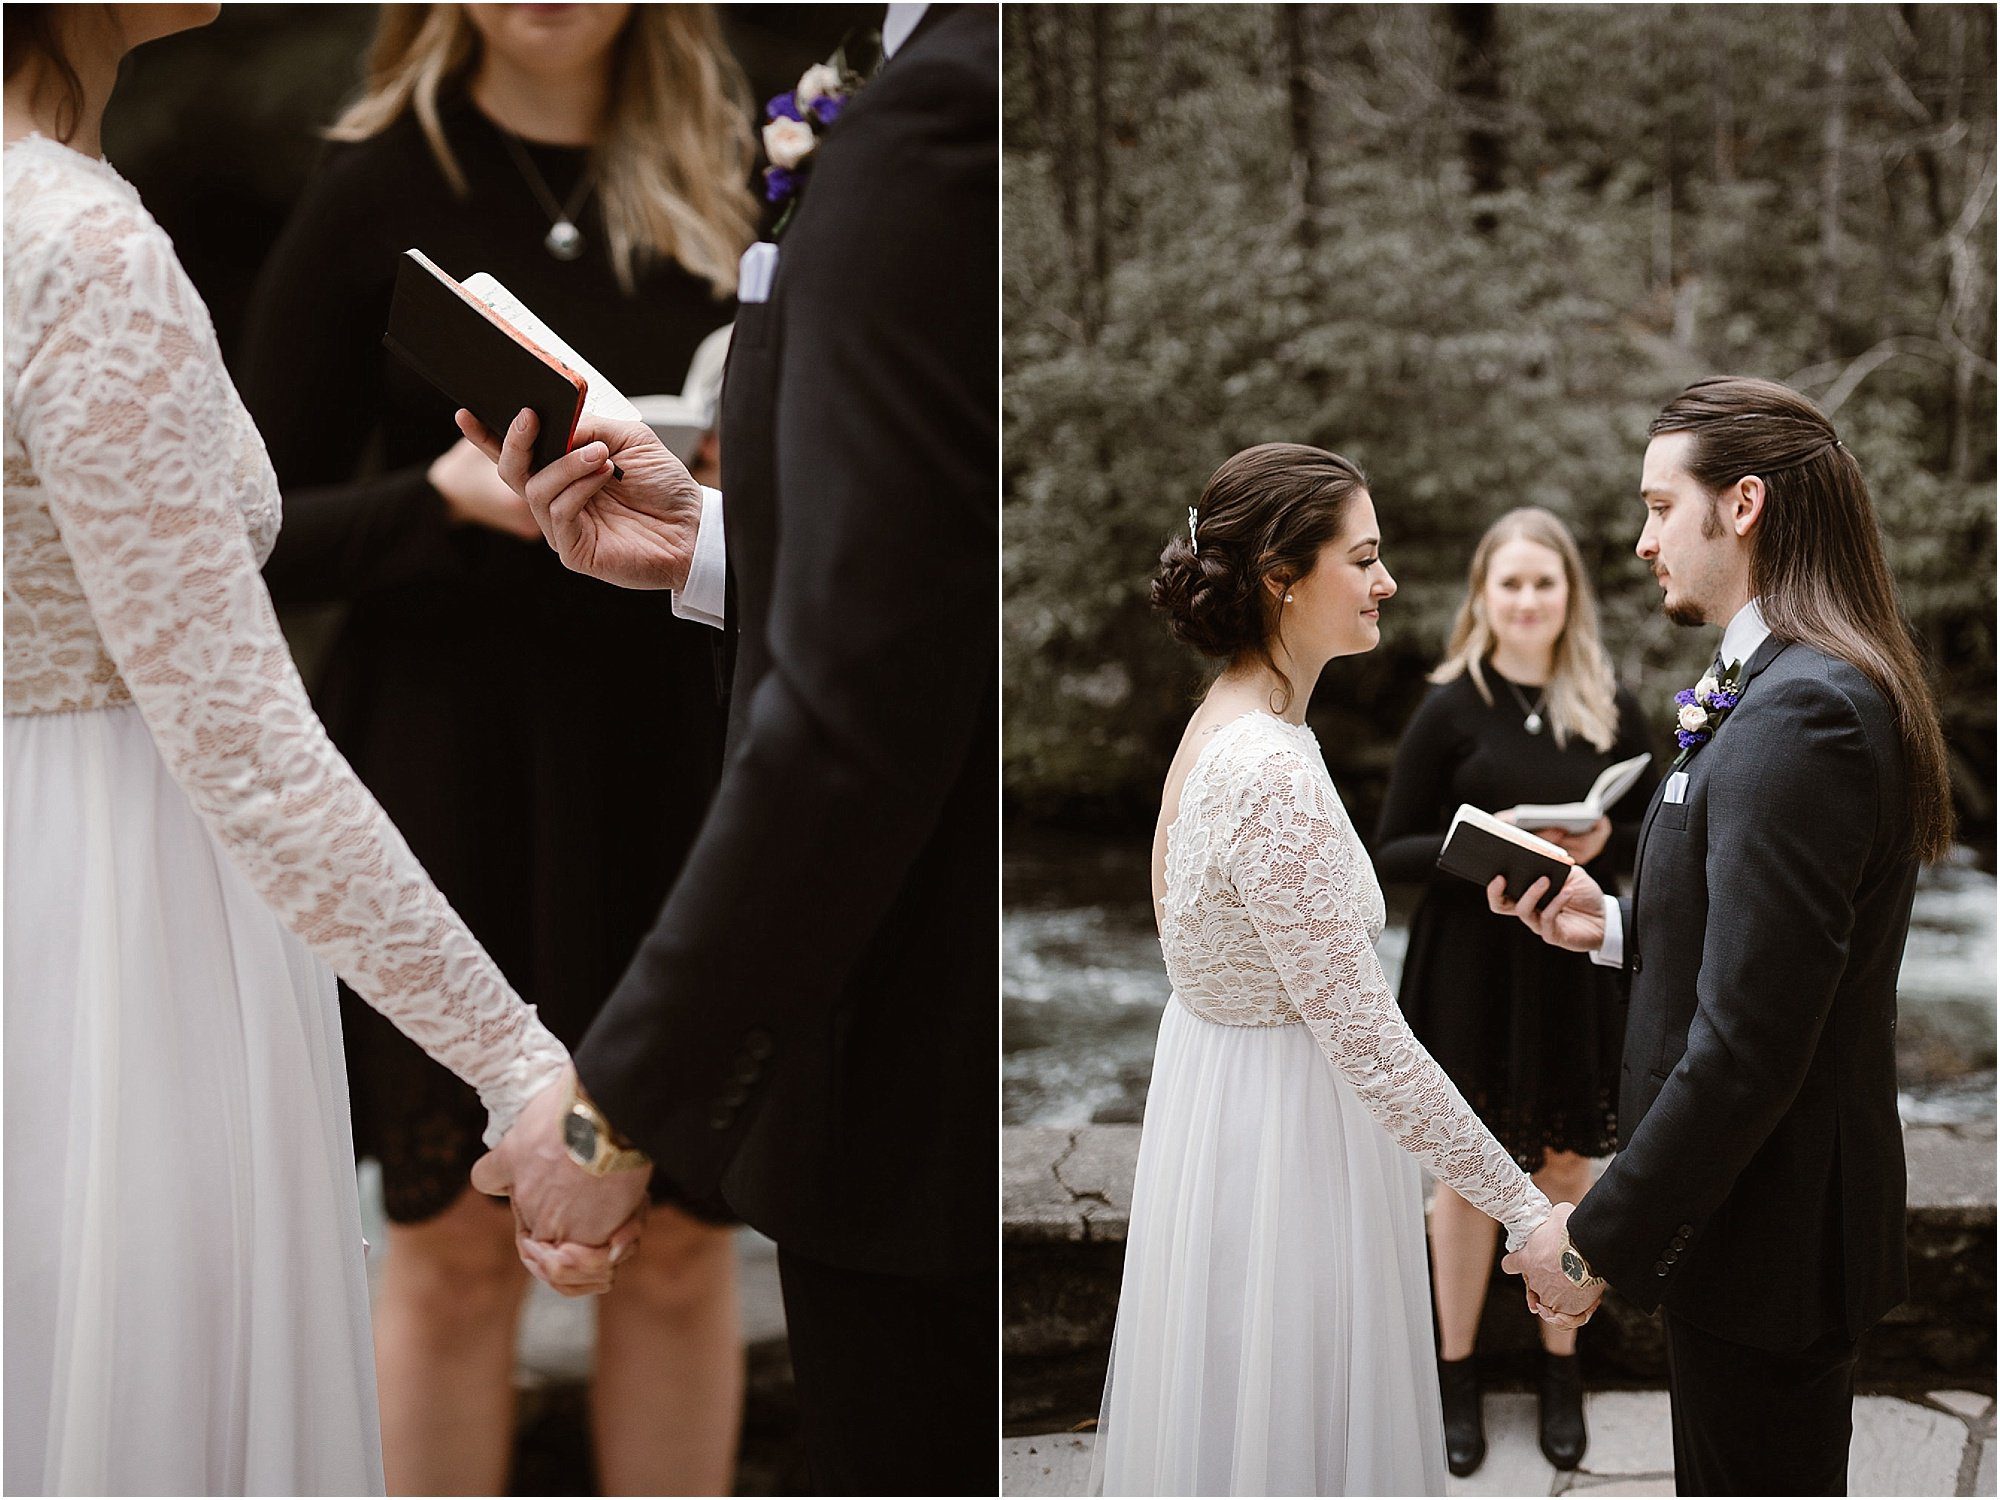 Bride and groom reading vows at elopement in Smokies